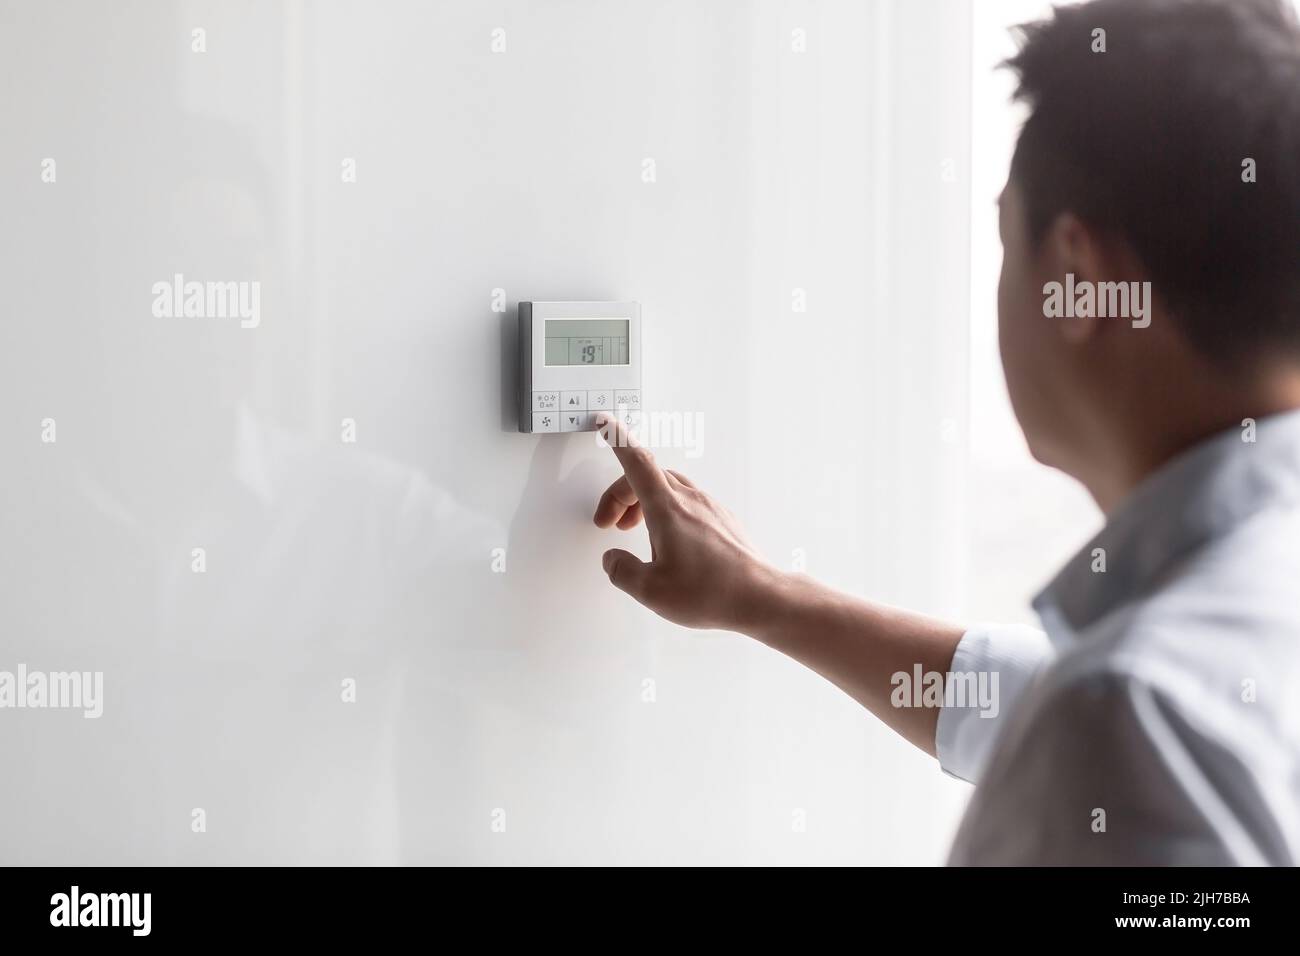 Close-up photo. The hand of a young man in a white shirt turns on the control buttons of the air conditioner hanging on the wall. Standing on the right Stock Photo